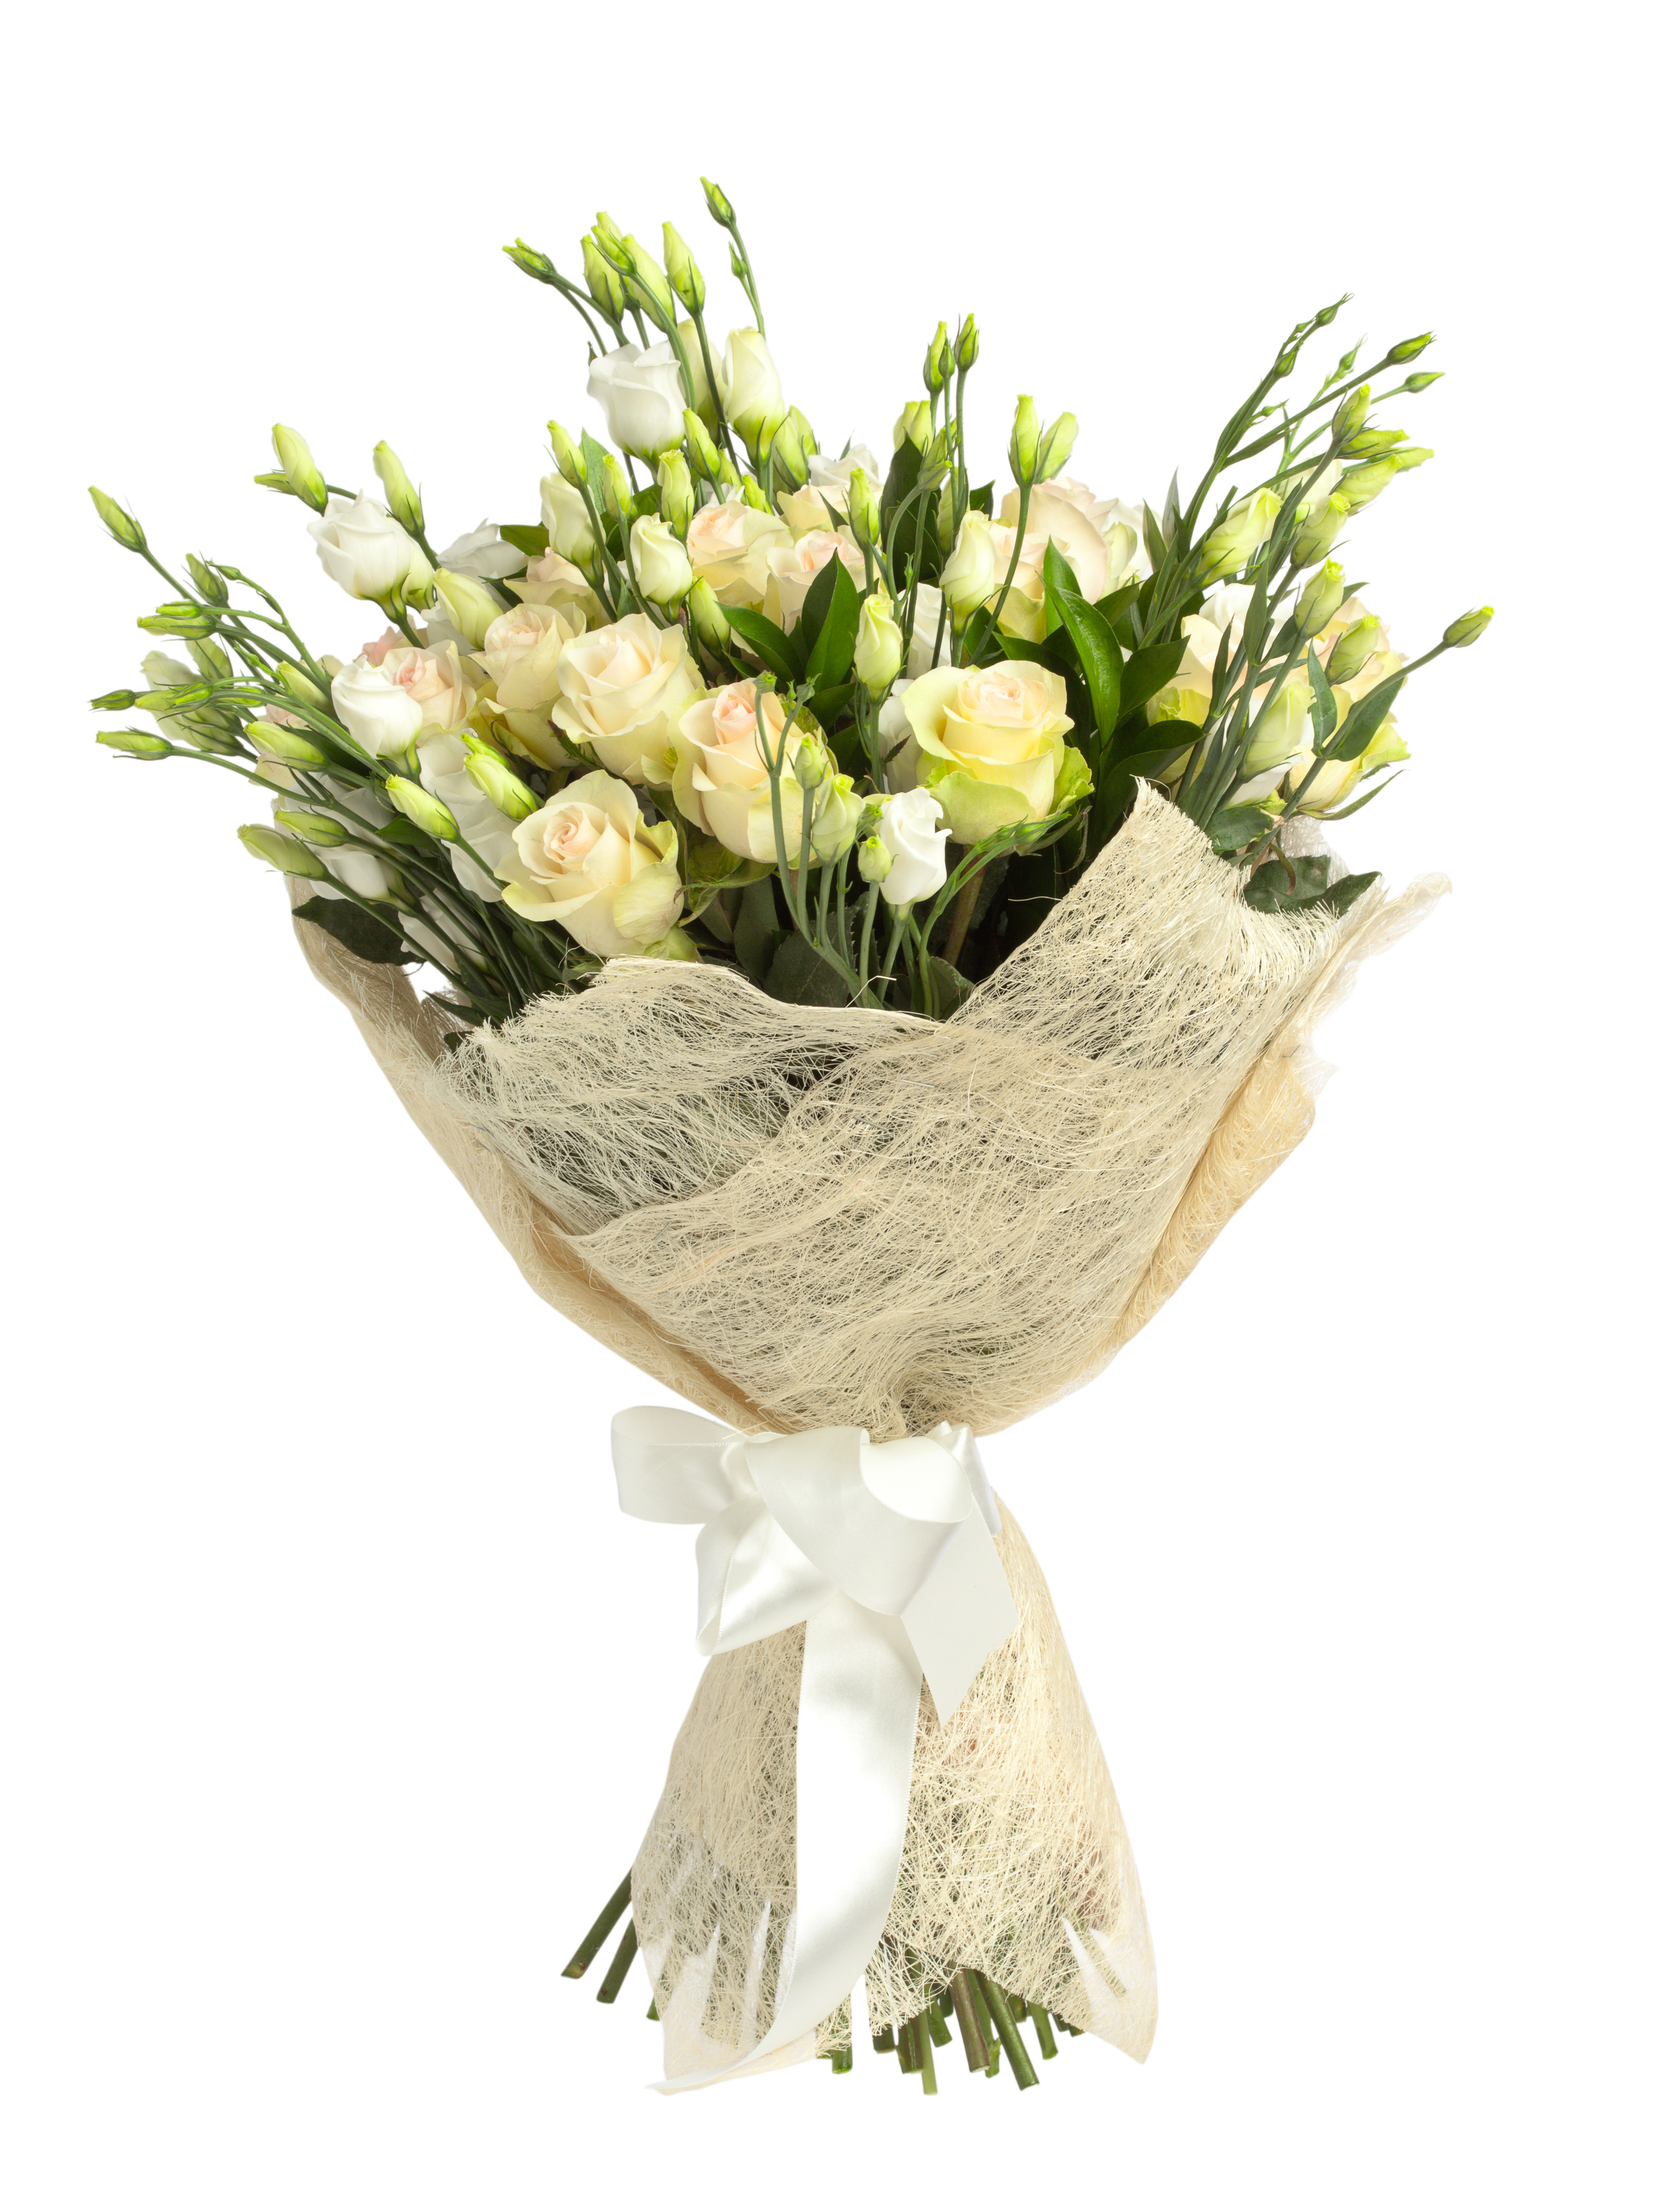 Creams & Whites Hand-Tied Bouquet